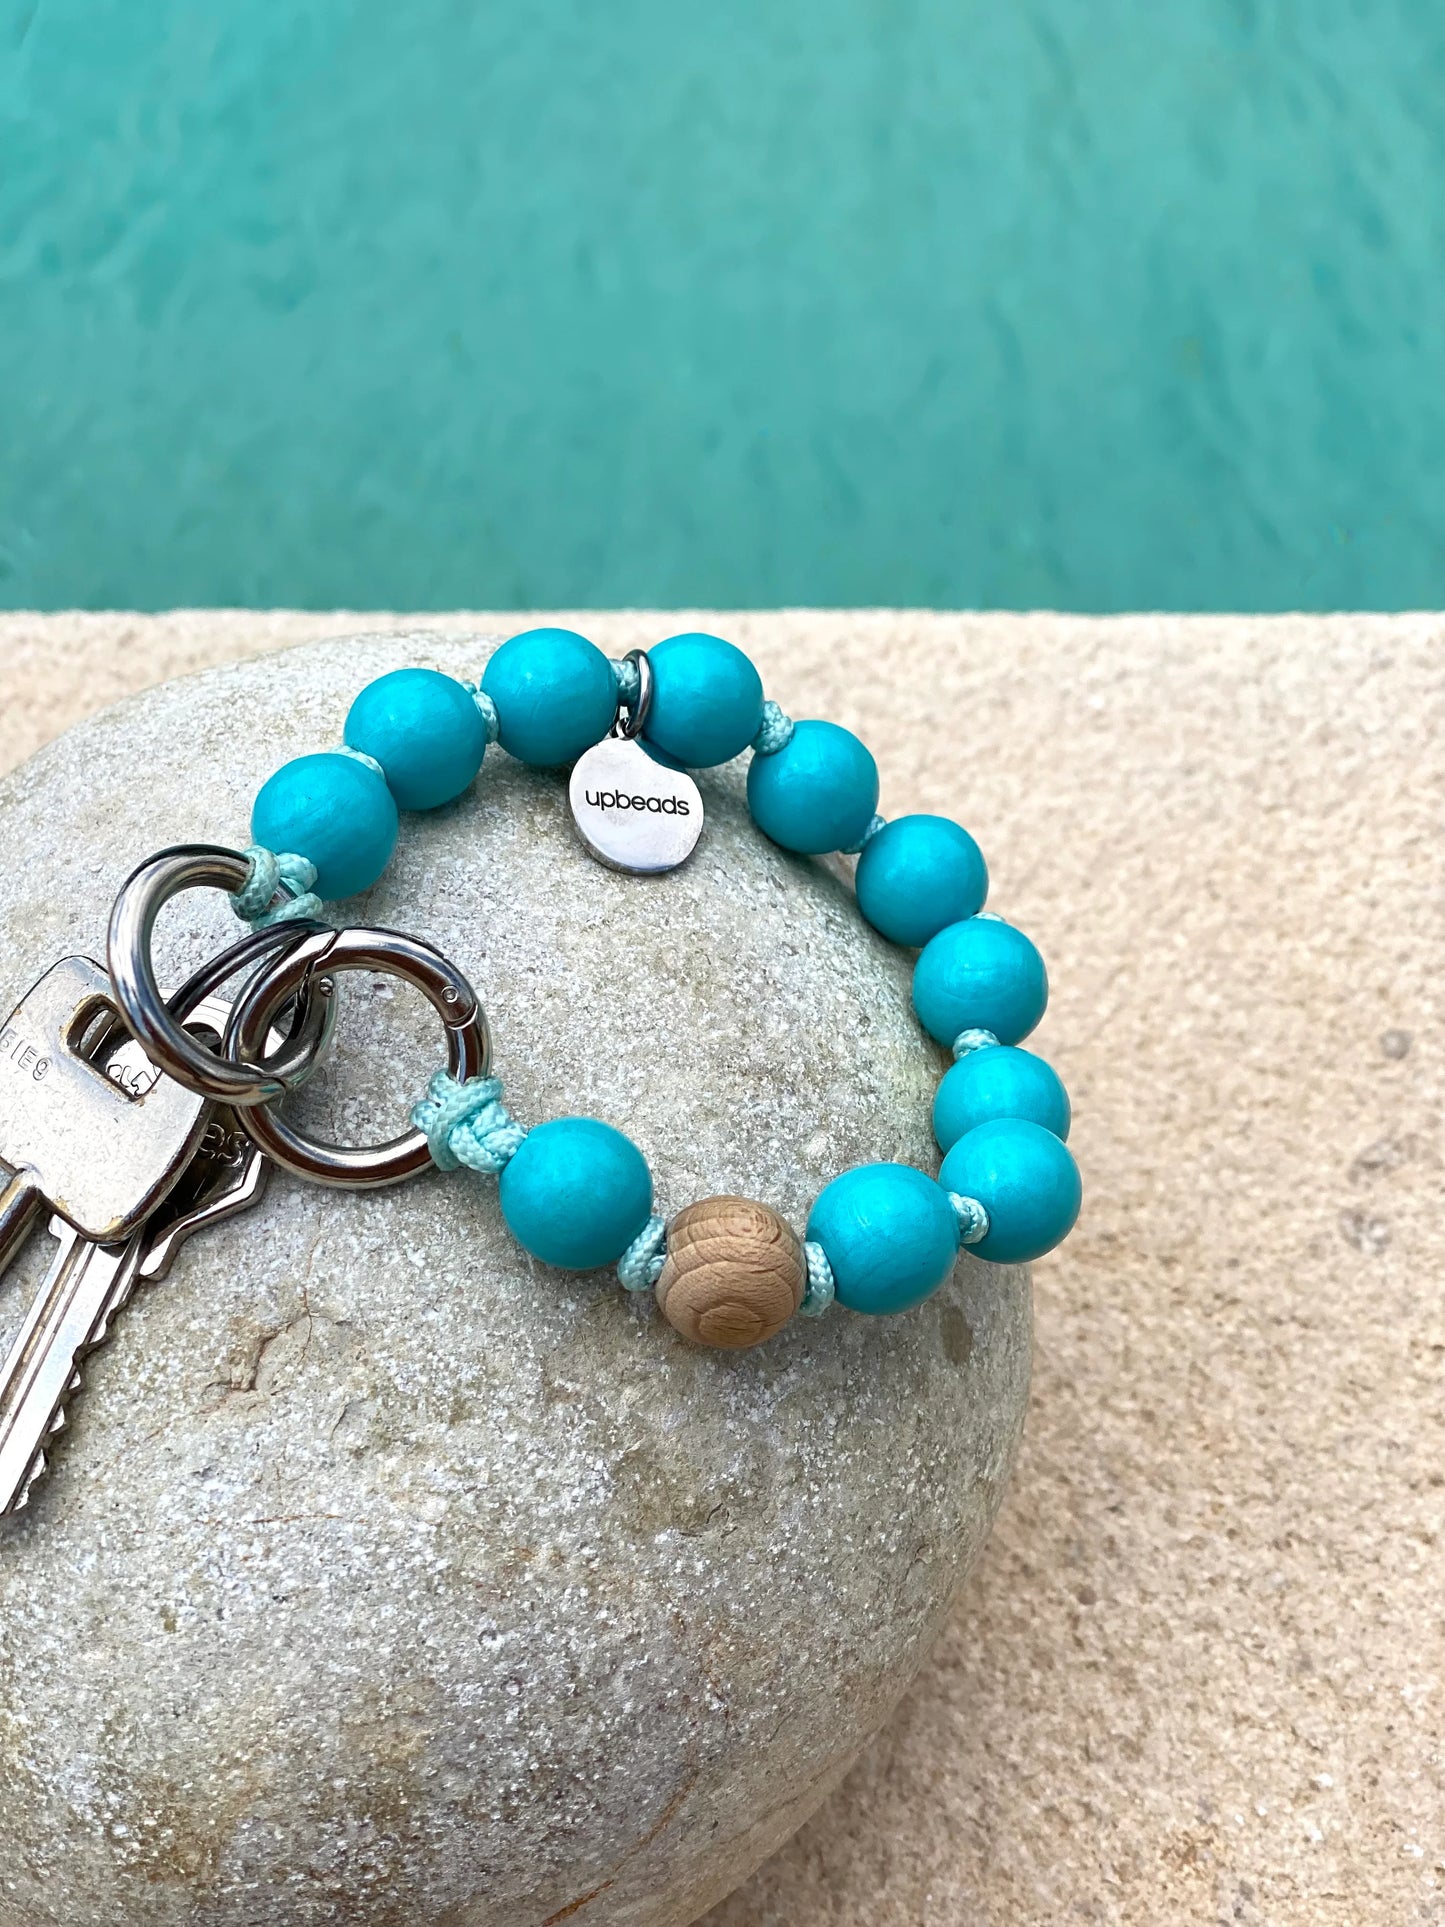 mini Bahamas on a stone at a pool in summer used as a keychain turquoise